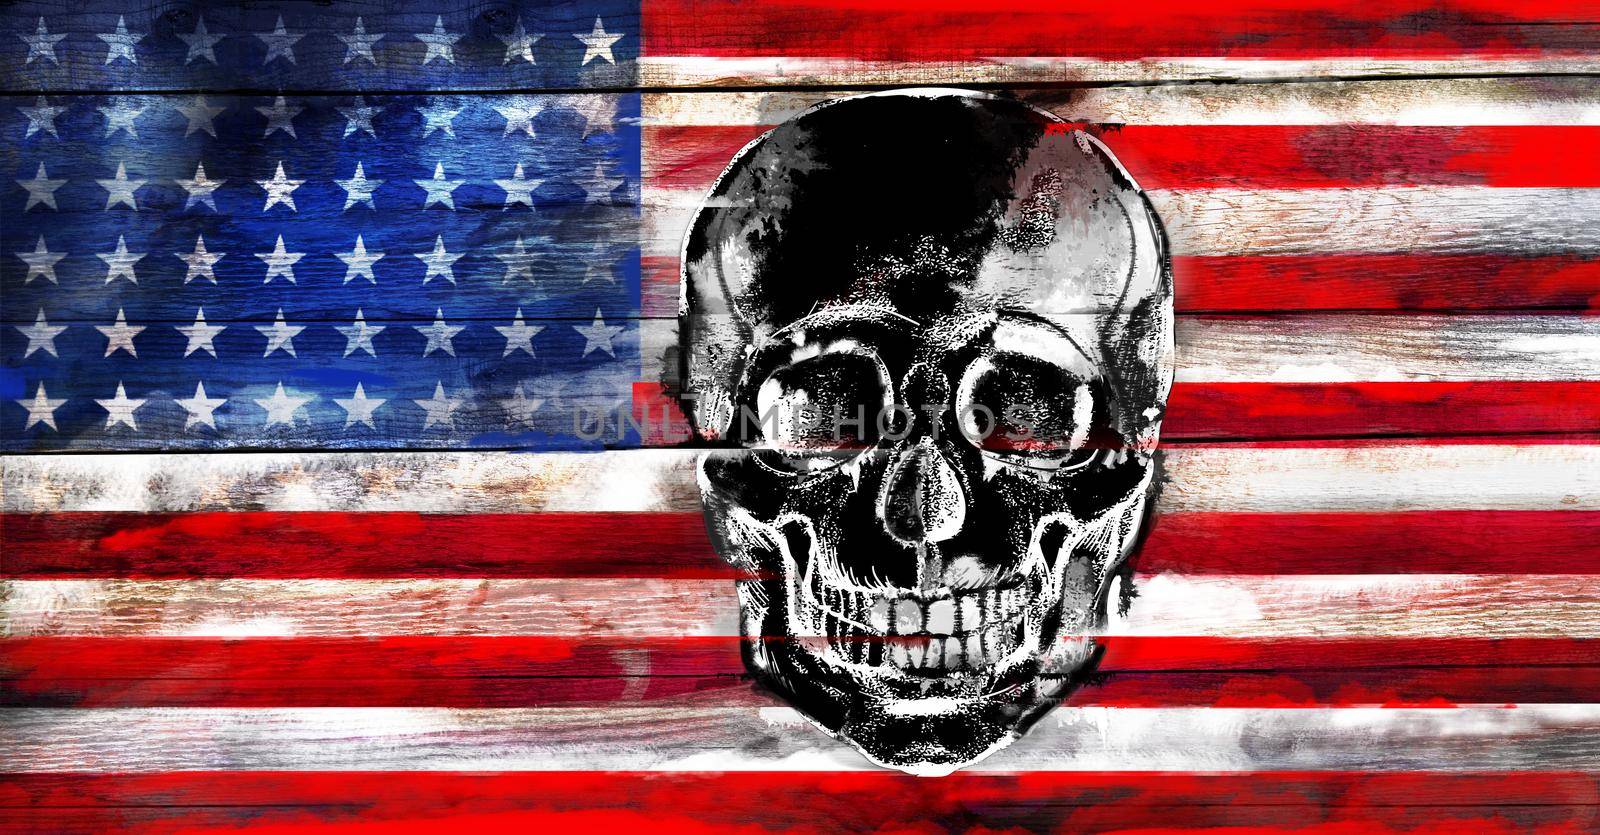 American flag with a human skull on a wood surface by SlayCer